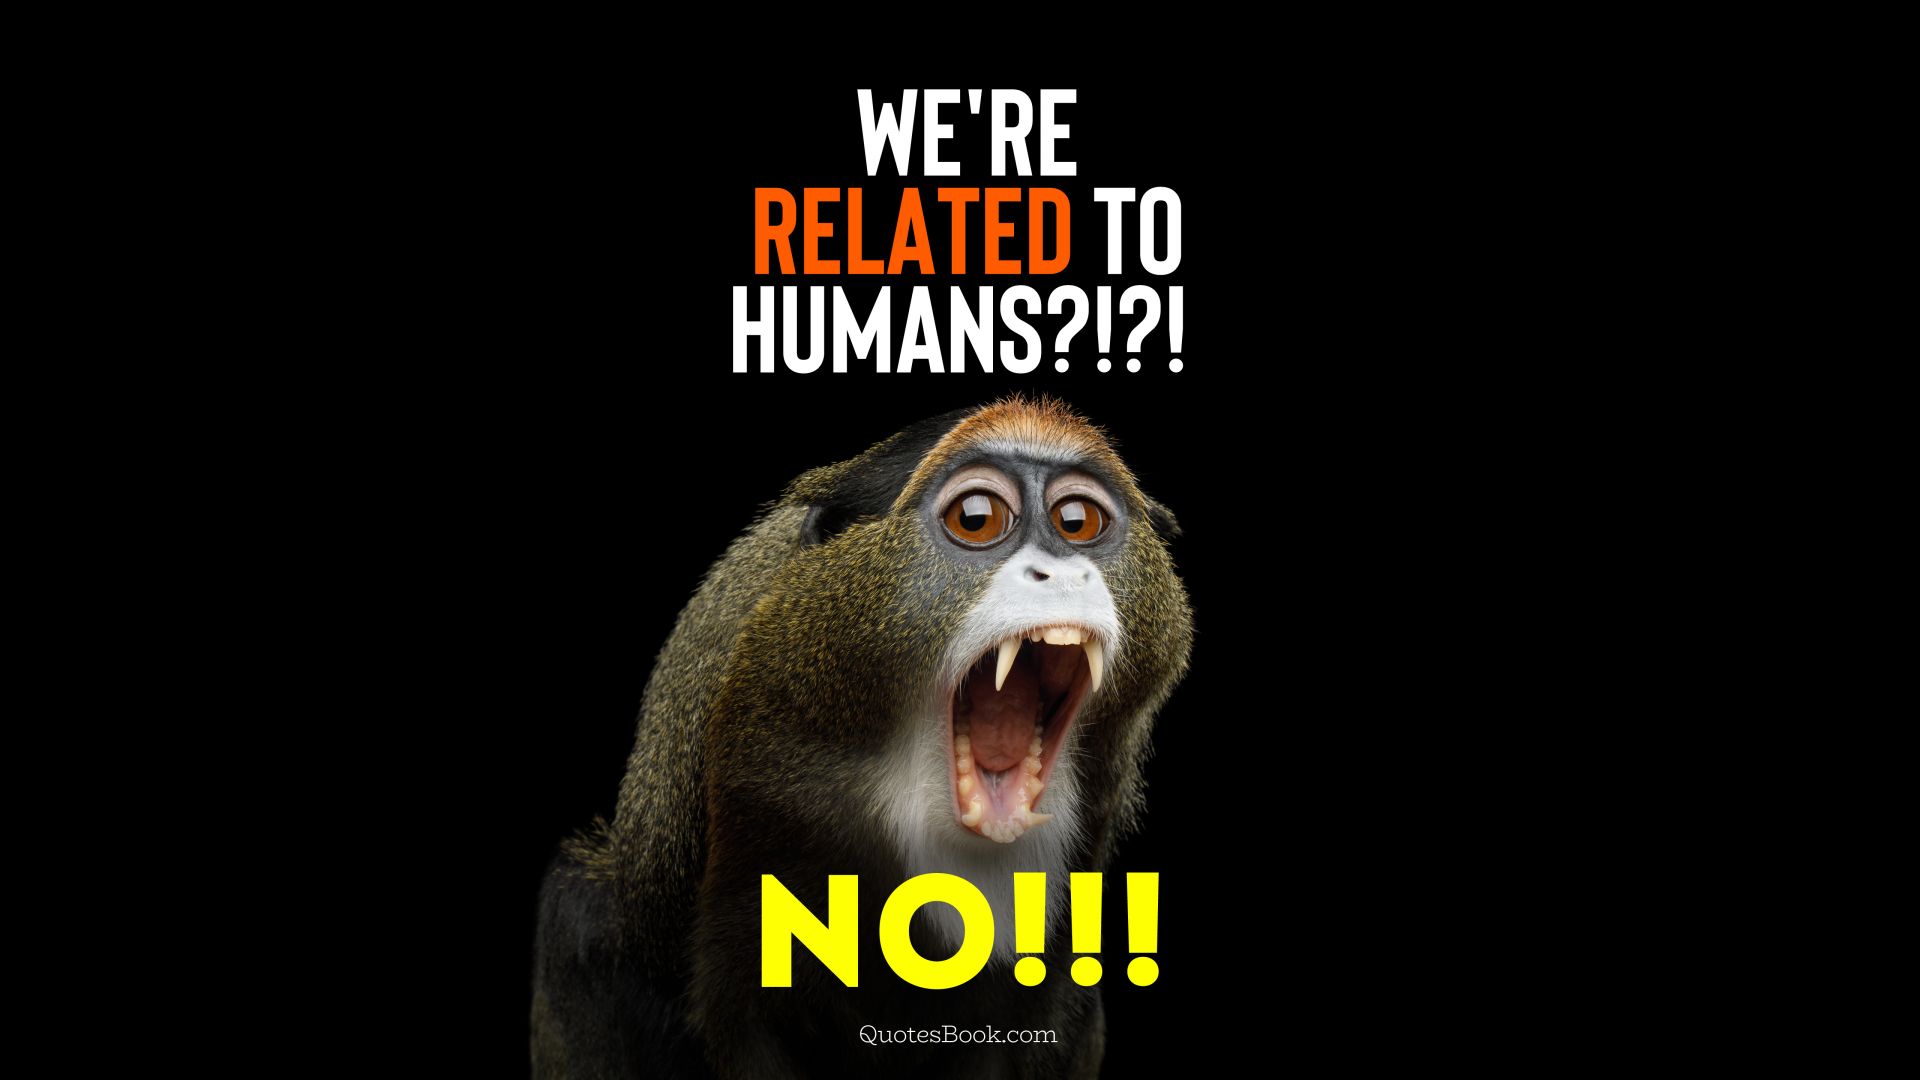 We're related to humans?!?! No!!!